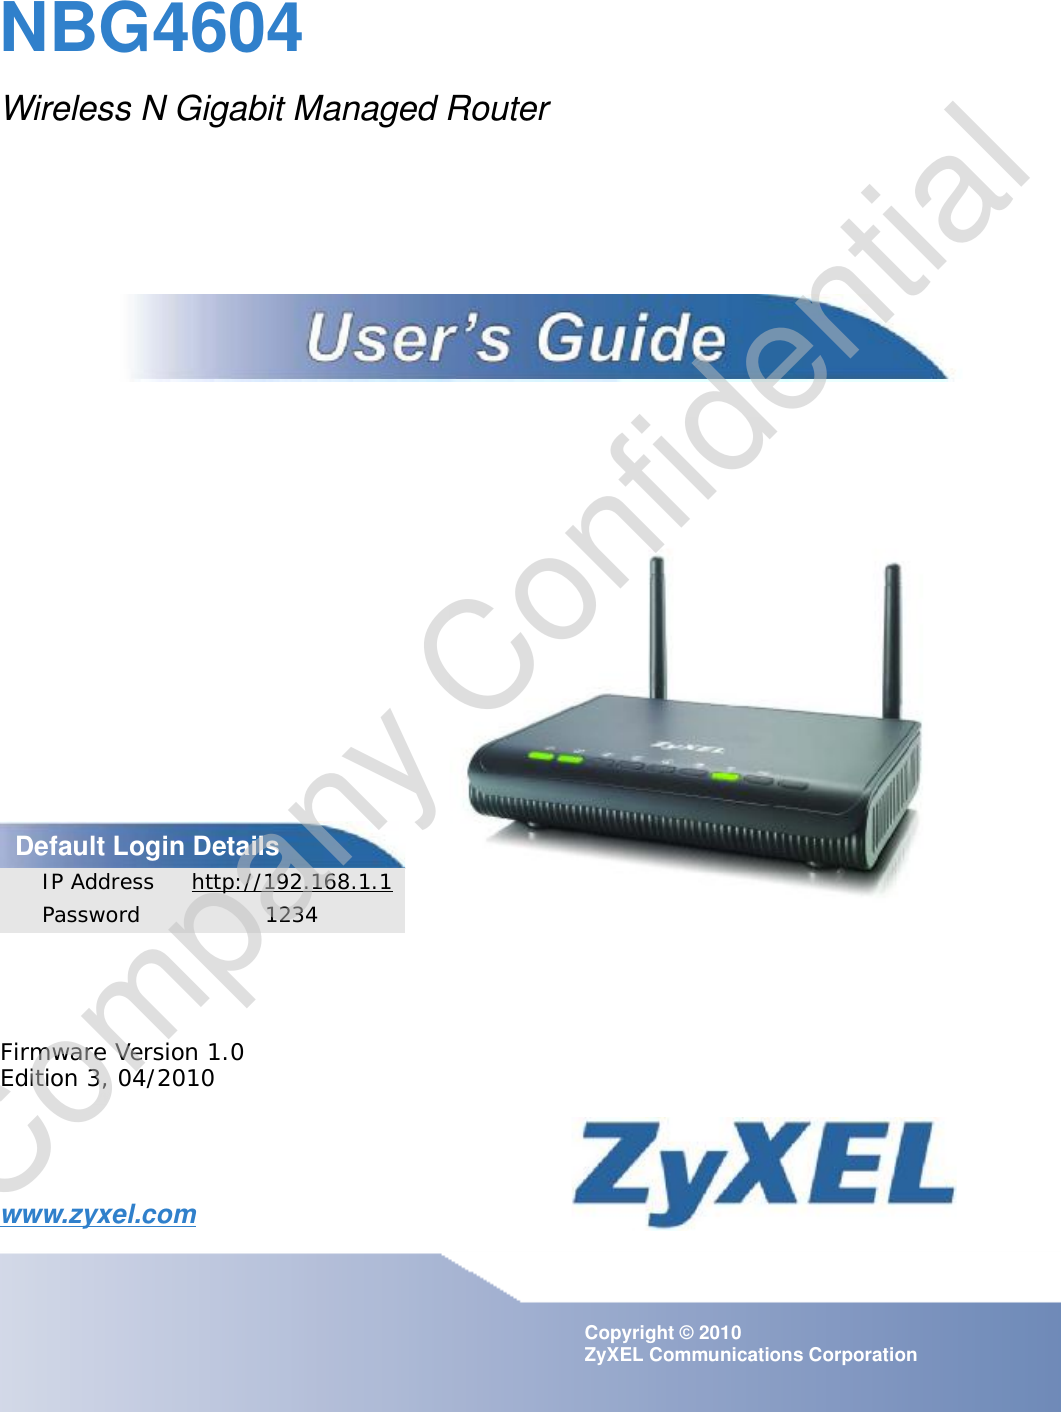 www.zyxel.comwww.zyxel.comNBG4604Wireless N Gigabit Managed RouterCopyright © 2010ZyXEL Communications CorporationFirmware Version 1.0Edition 3, 04/2010Default Login DetailsIP Address http://192.168.1.1Password 1234Company Confidential